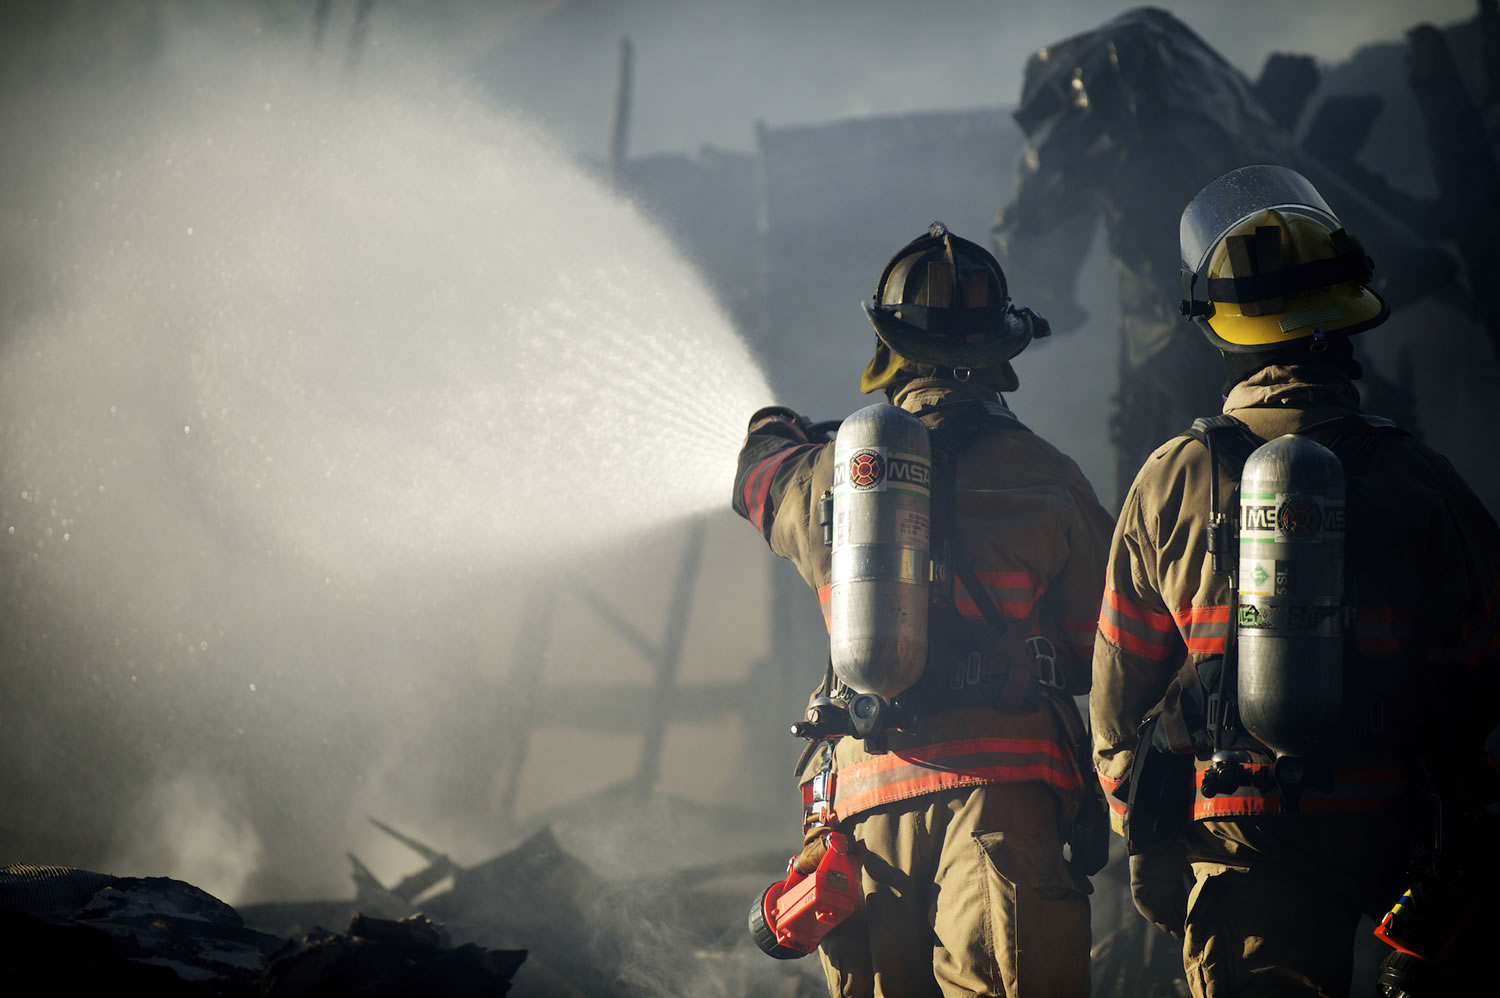 At one point, crews said over emergency radios that they were using all available water on the fire.